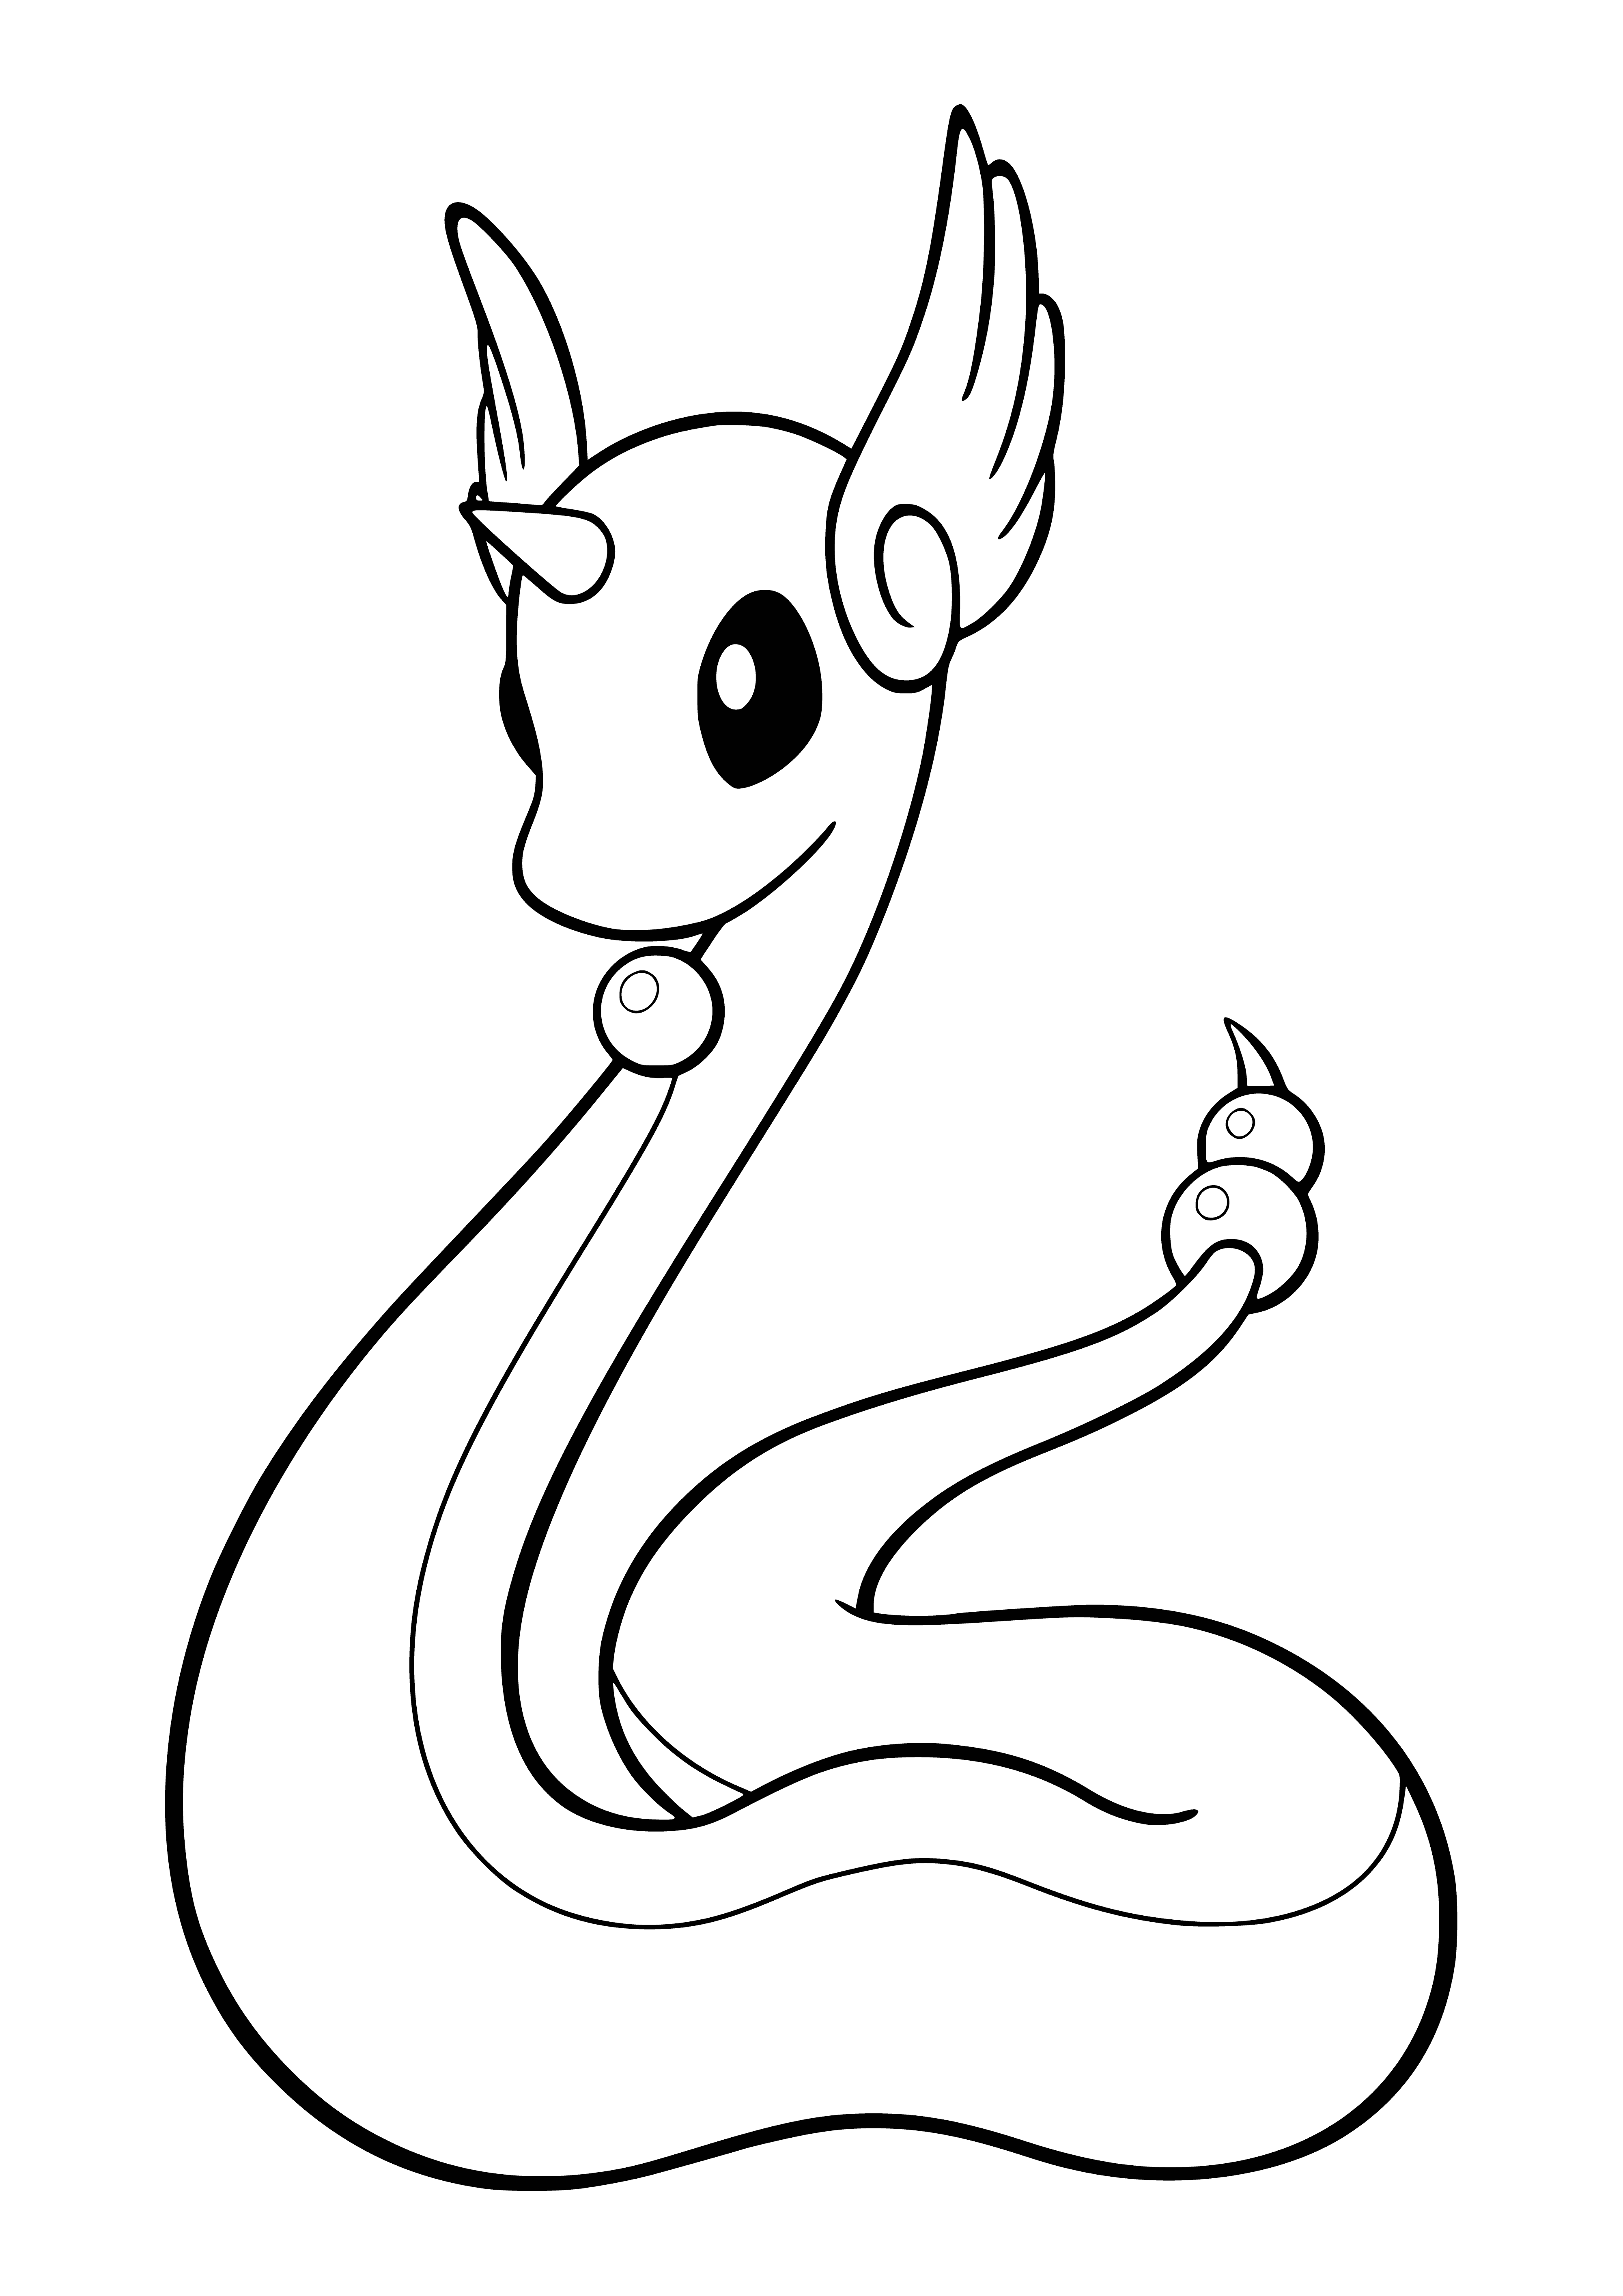 coloring page: Long, thin blue Pokemon with glossy scales, billowing white mane, and a small white horn. Eyes are blue with white pupils.